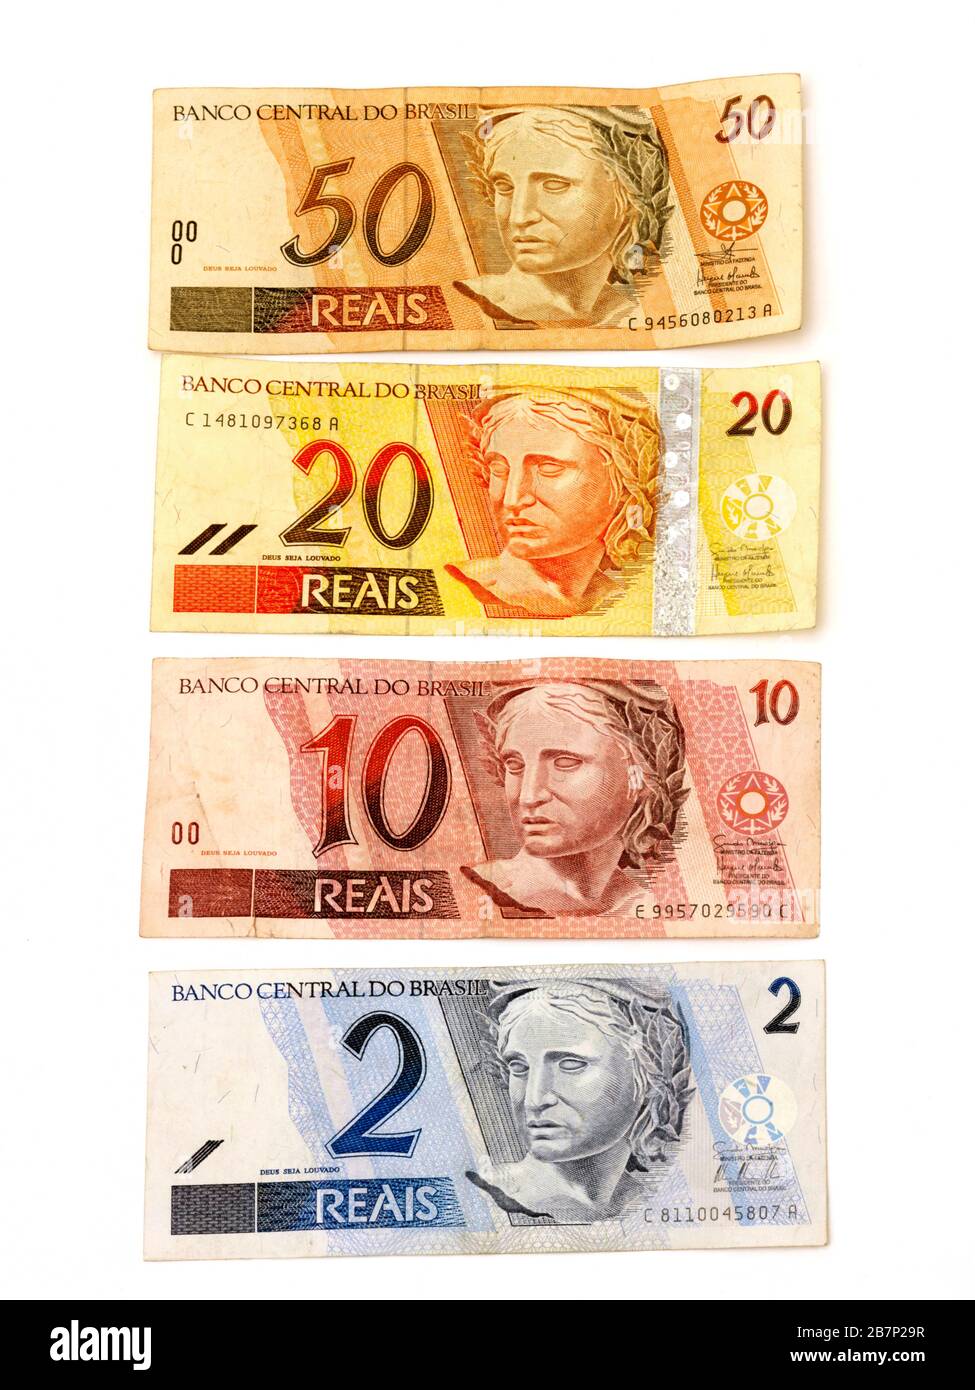 Brazilian Reias Banknotes Depicting The Republic's Effigy as a Bust First Series (1994-2010) Stock Photo